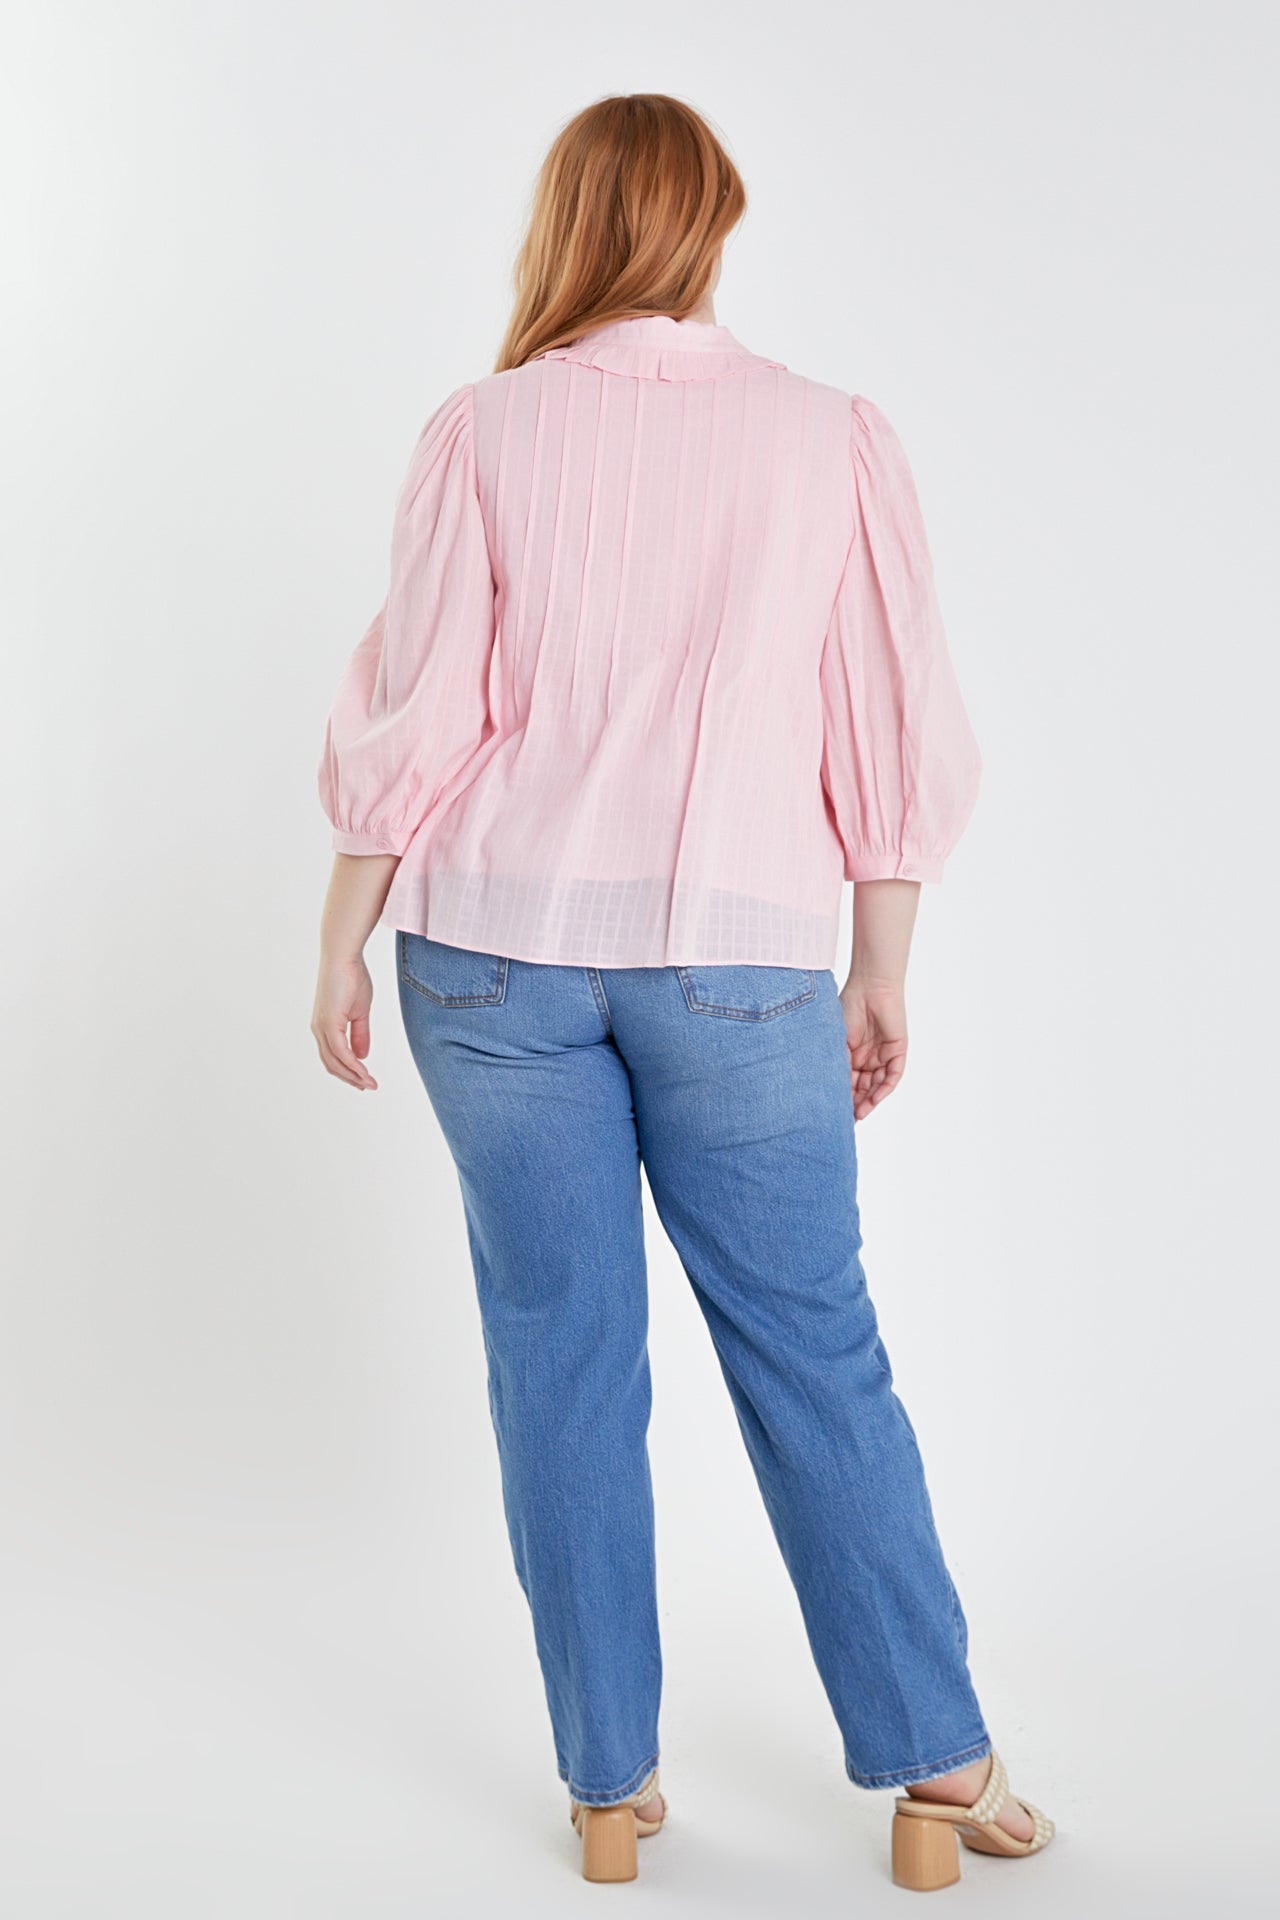 ENGLISH FACTORY - Ruffled Collar Blouse - SHIRTS & BLOUSES available at Objectrare